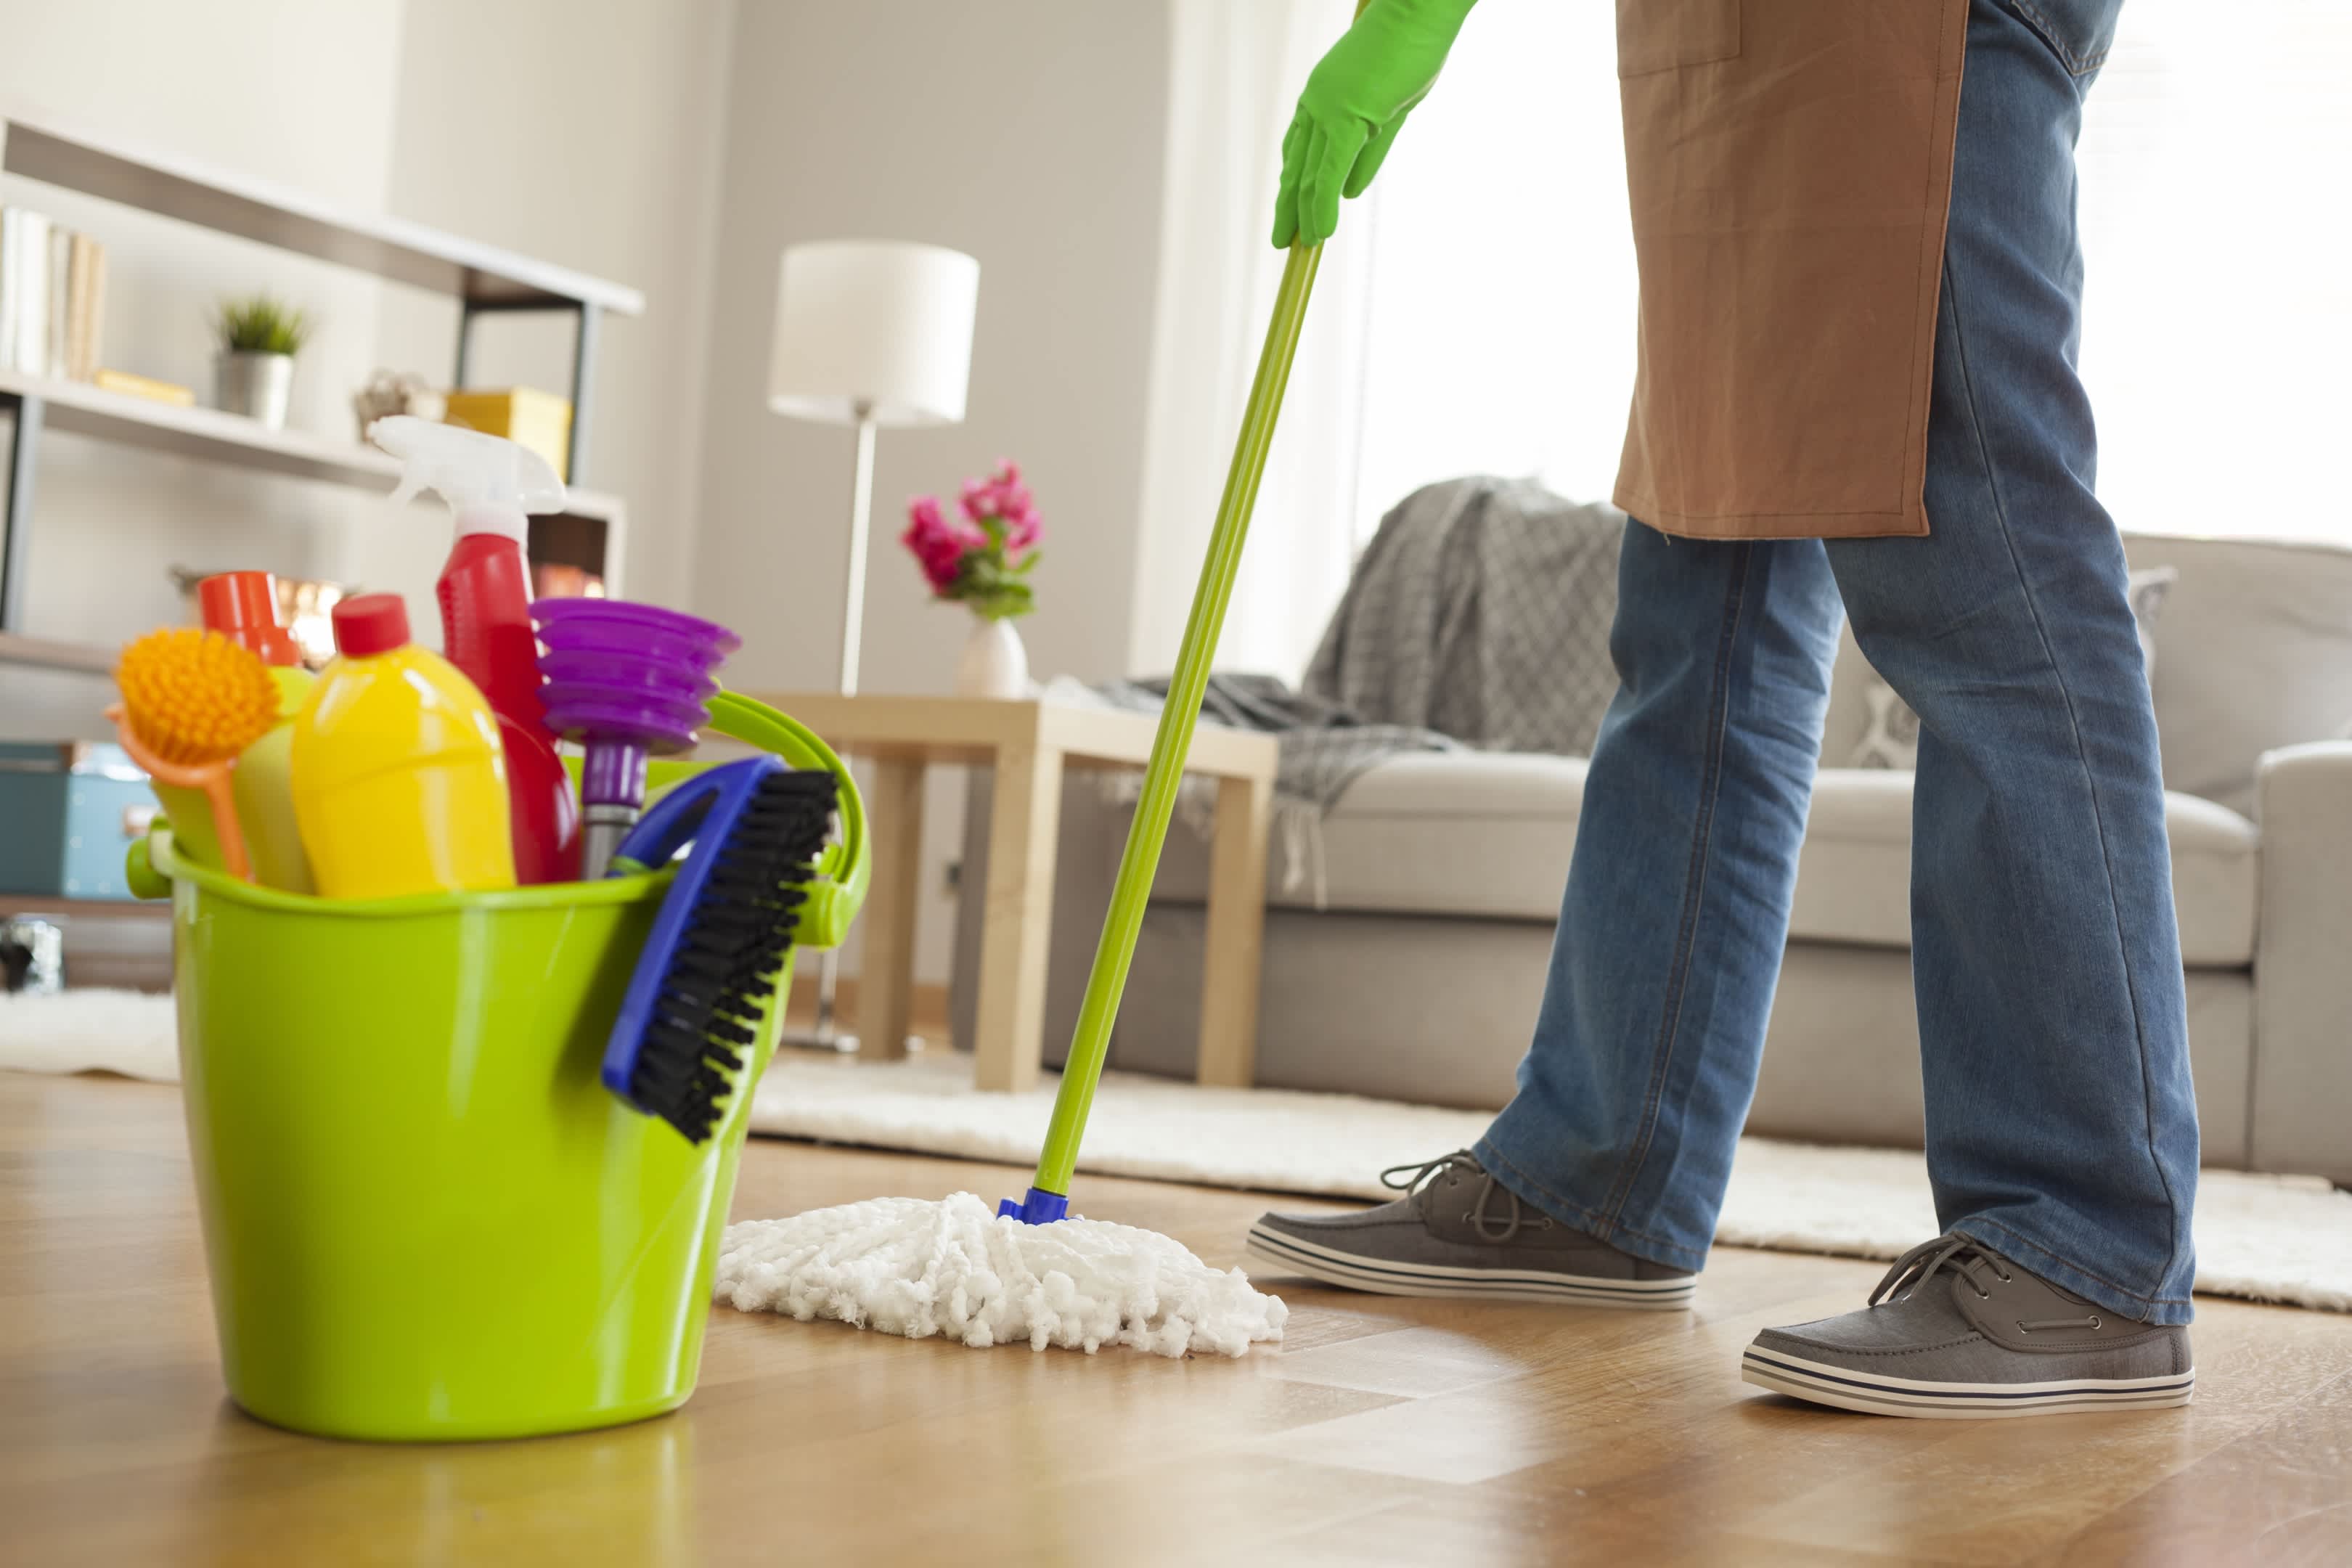 Eva - Home Cleaning | Kitchen Cleaning | Carpet Cleaning | Office Cleaning | Sofa Cleaning | Pest Control | Sanitizetion Service